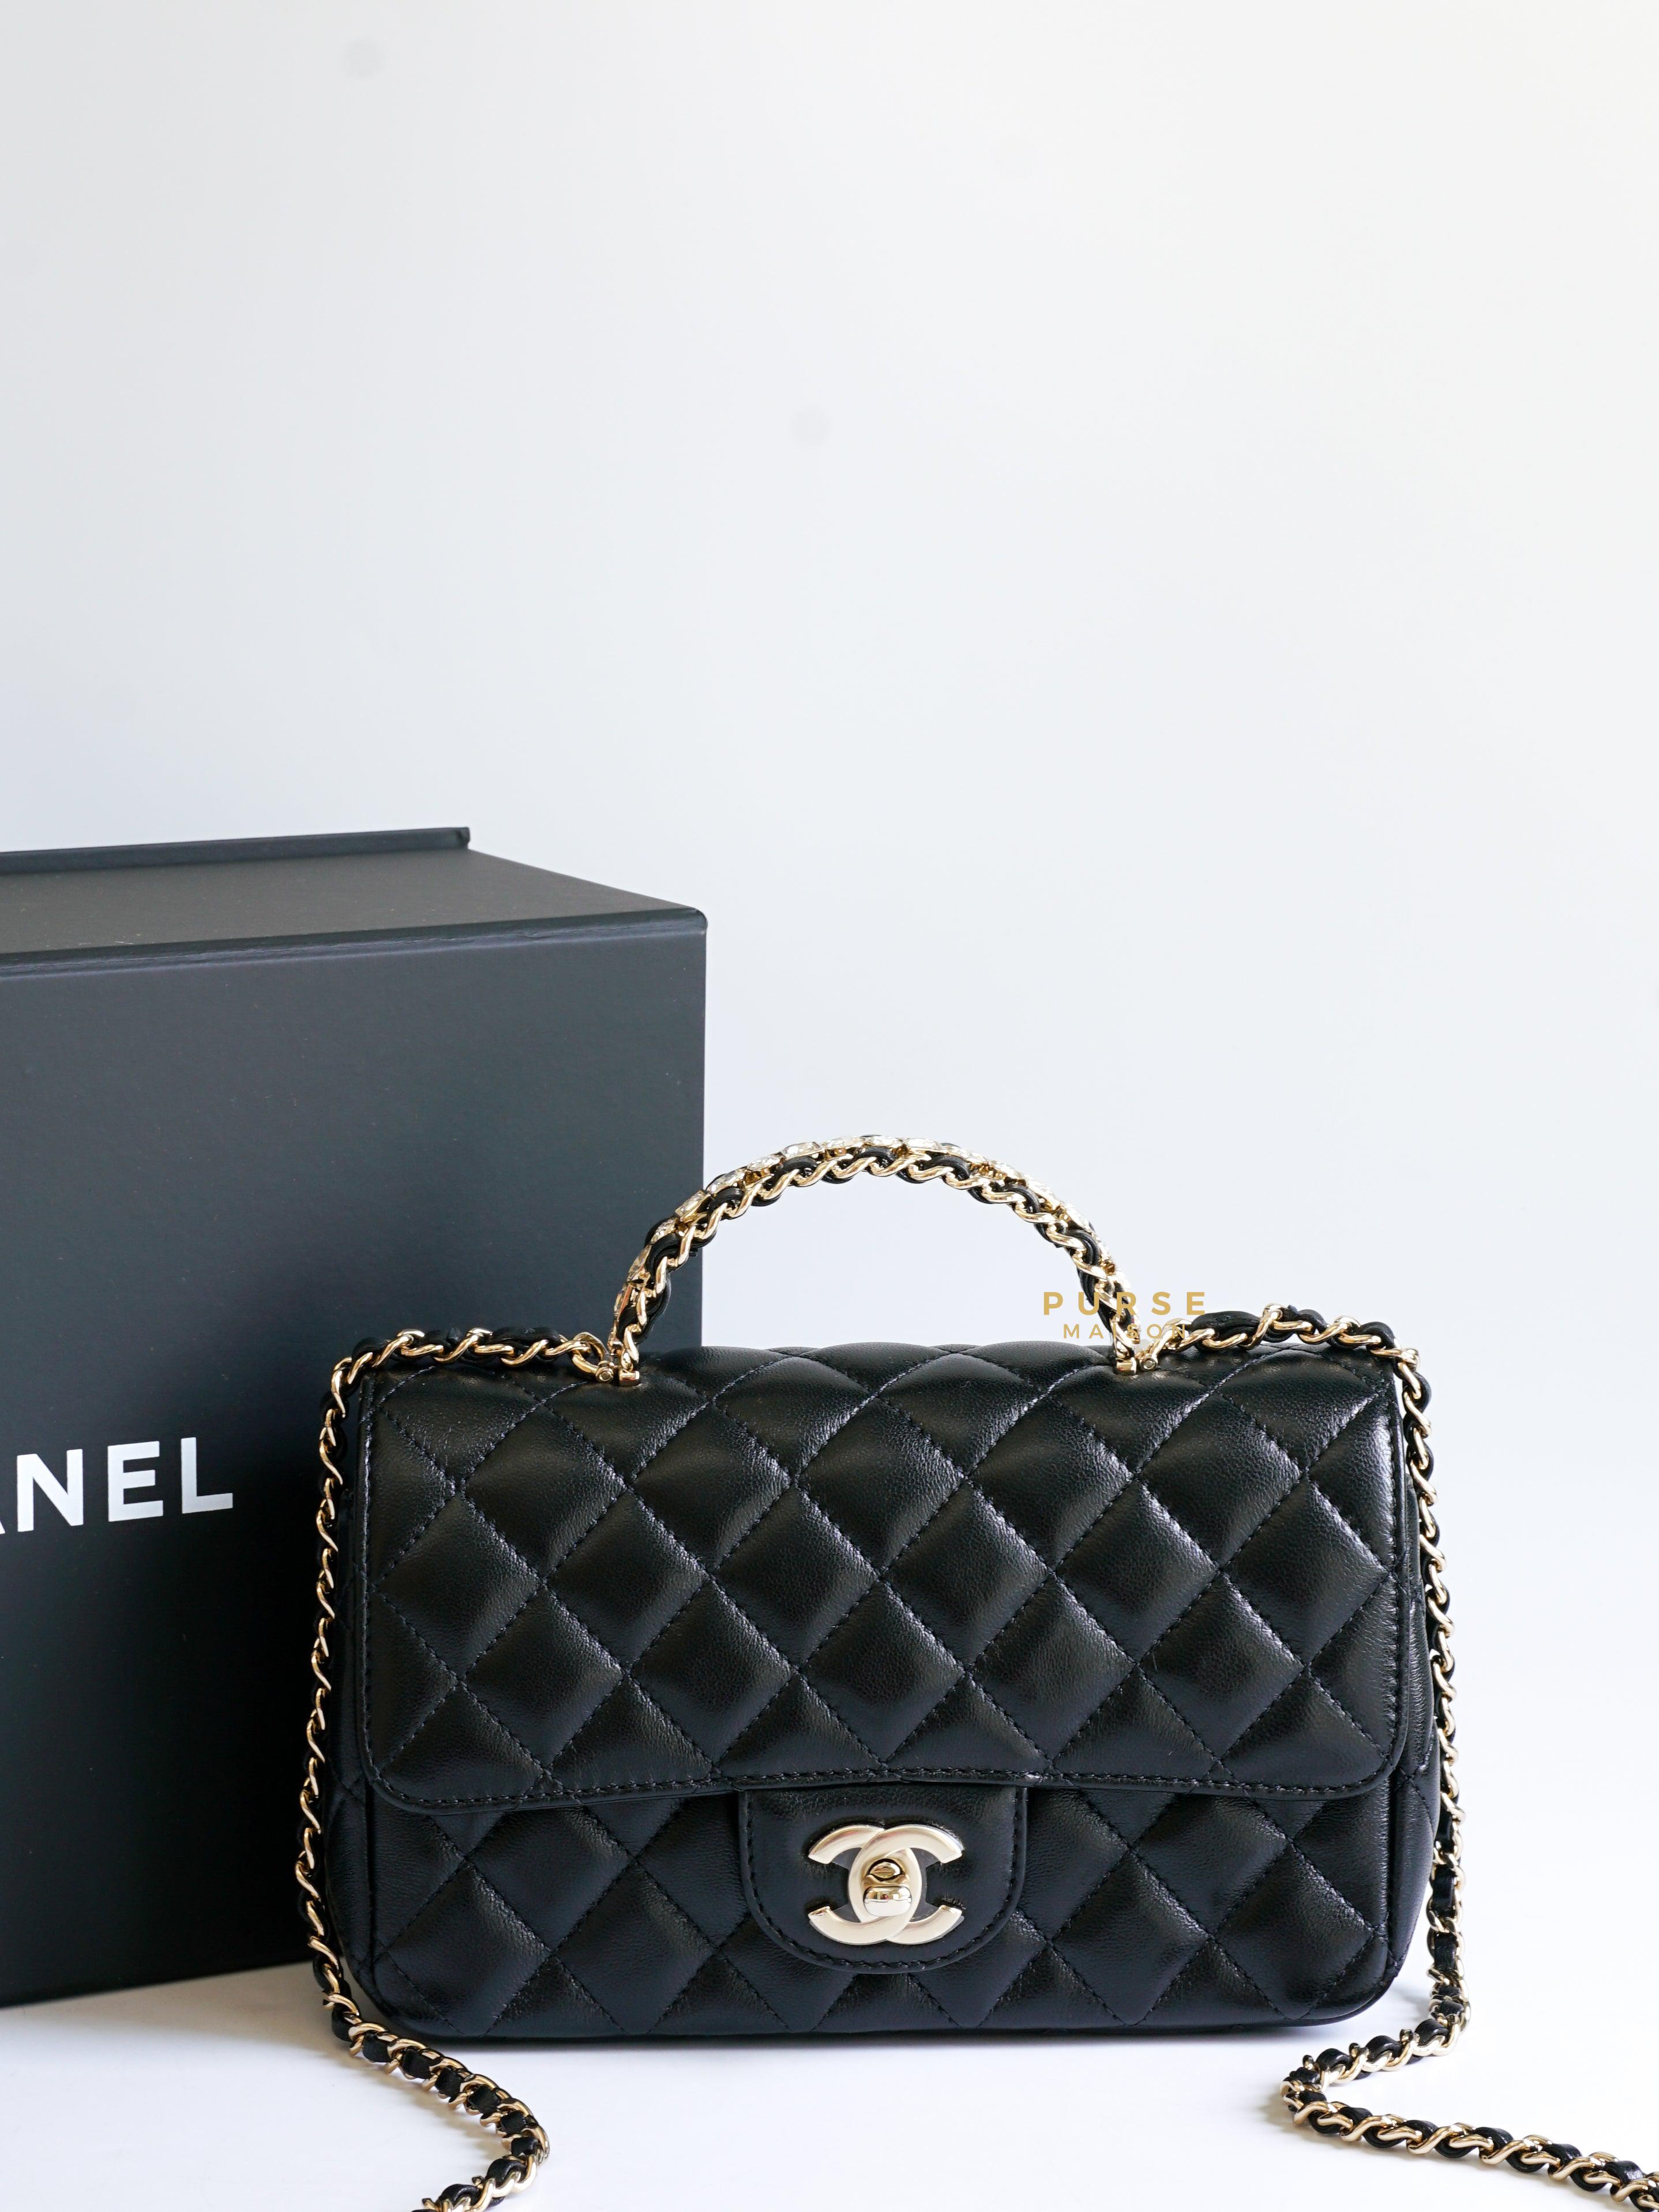 CHANEL Black Small Trendy Flap Bag Microchipped Light Gold